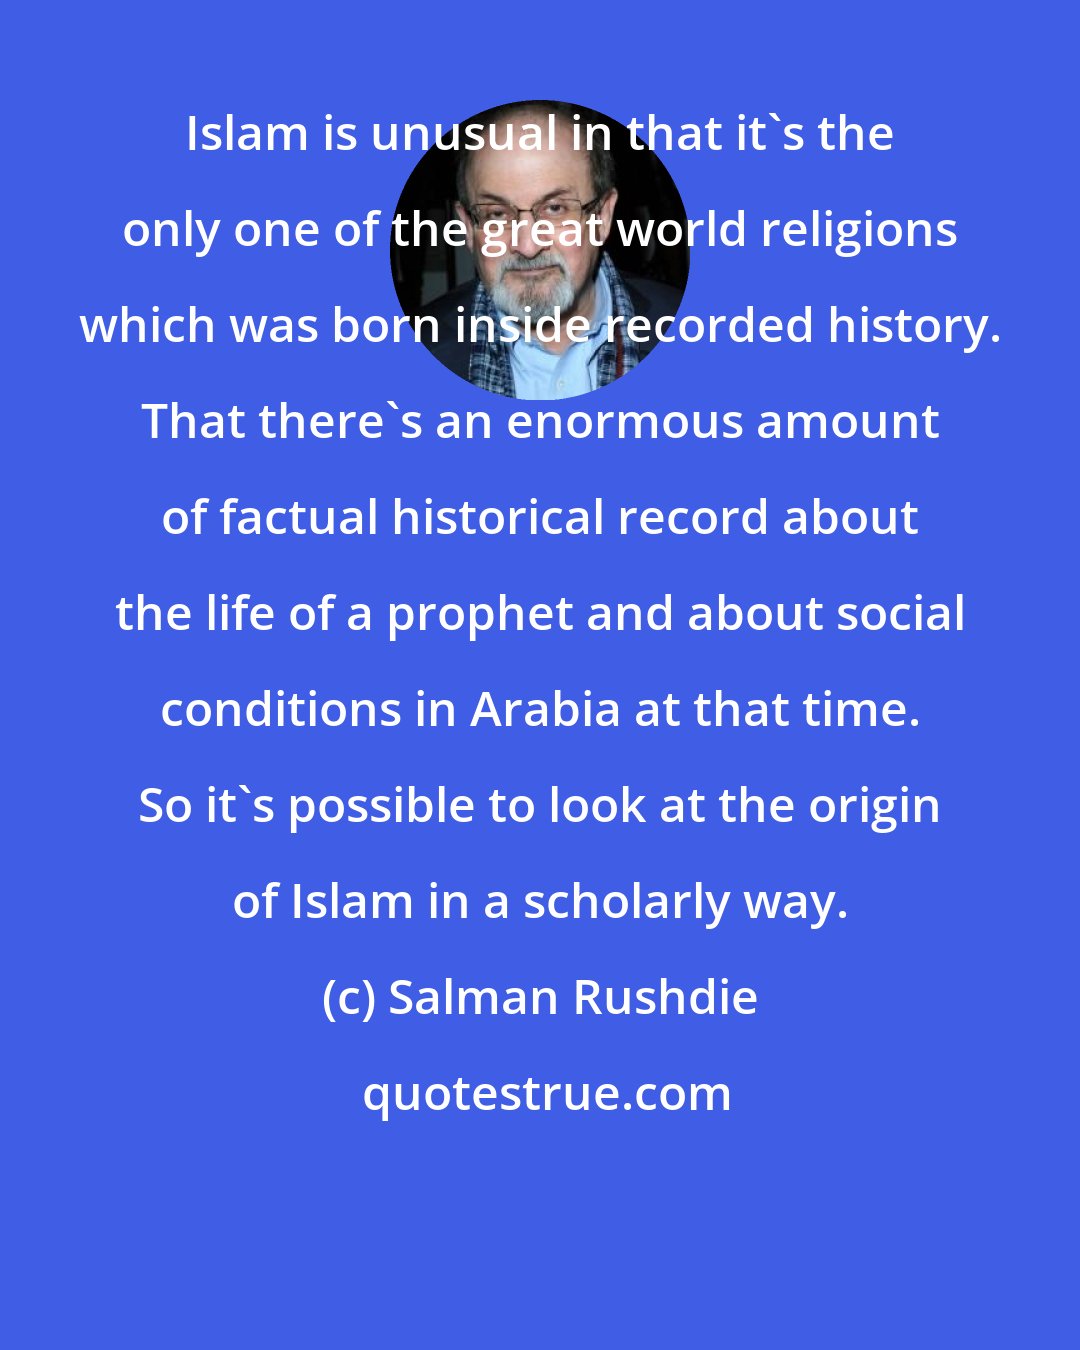 Salman Rushdie: Islam is unusual in that it's the only one of the great world religions which was born inside recorded history. That there's an enormous amount of factual historical record about the life of a prophet and about social conditions in Arabia at that time. So it's possible to look at the origin of Islam in a scholarly way.